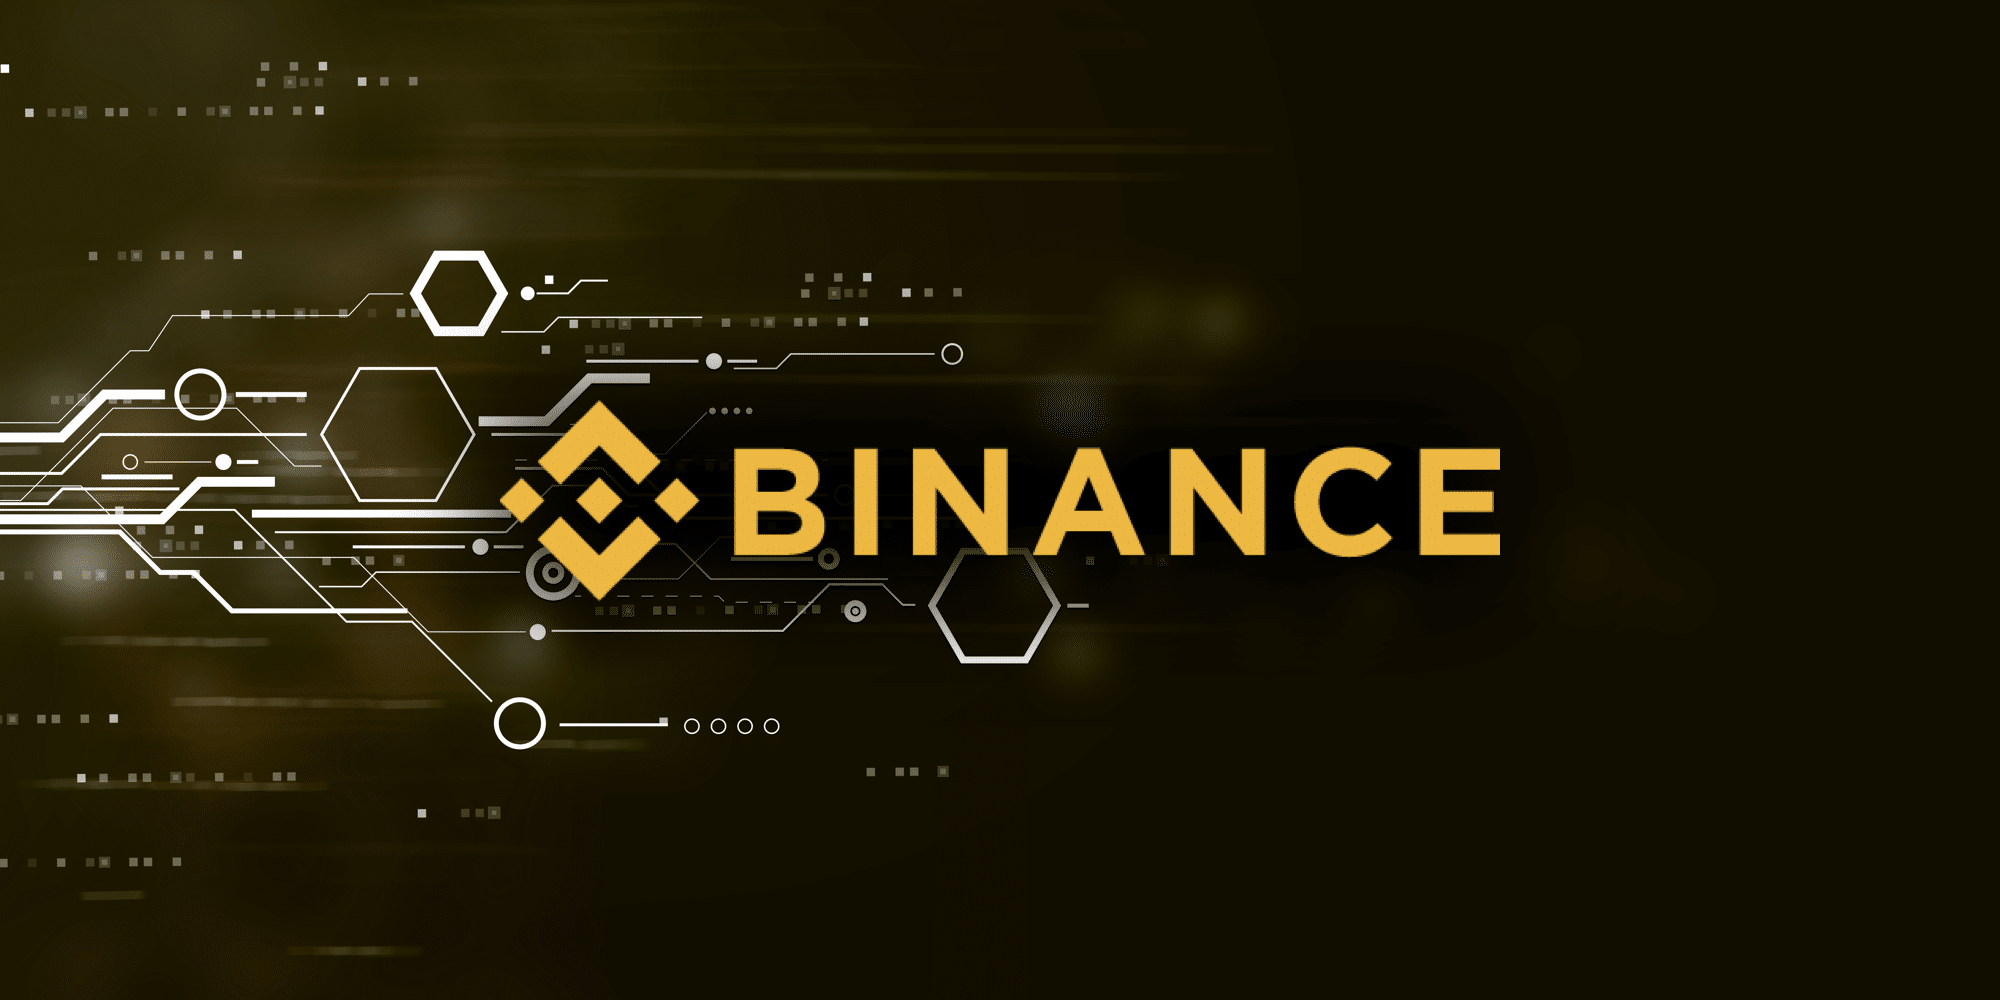 Binance is Set to Disclose Listing Fees Details and Donate 100% of it to Charity